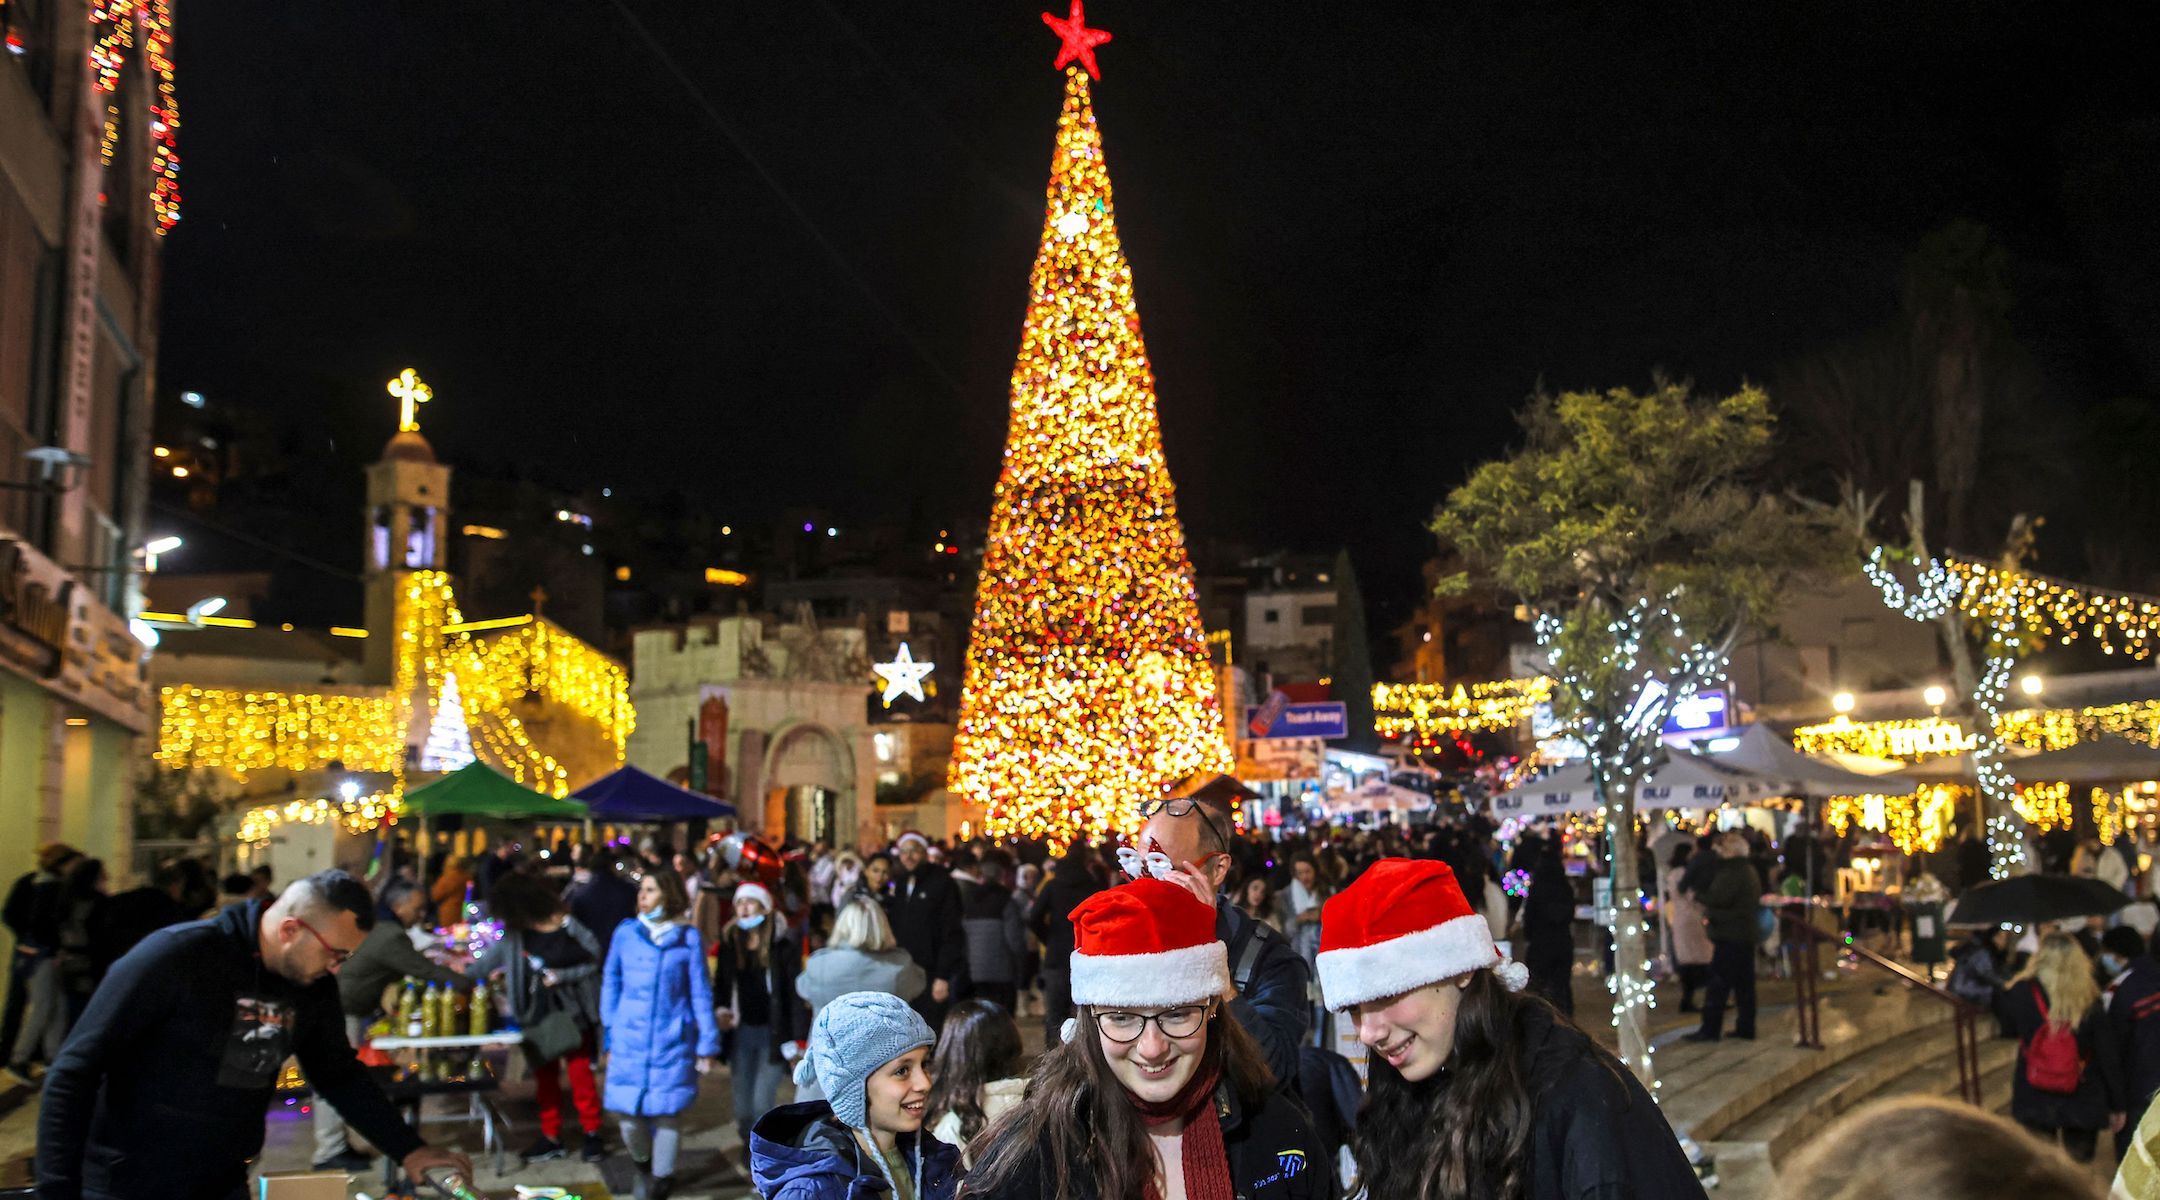 People gathering at Nazareth's Christmas tree ahead of the holiday in 2021.(Ahmad Gharabli/AFP via Getty Images)